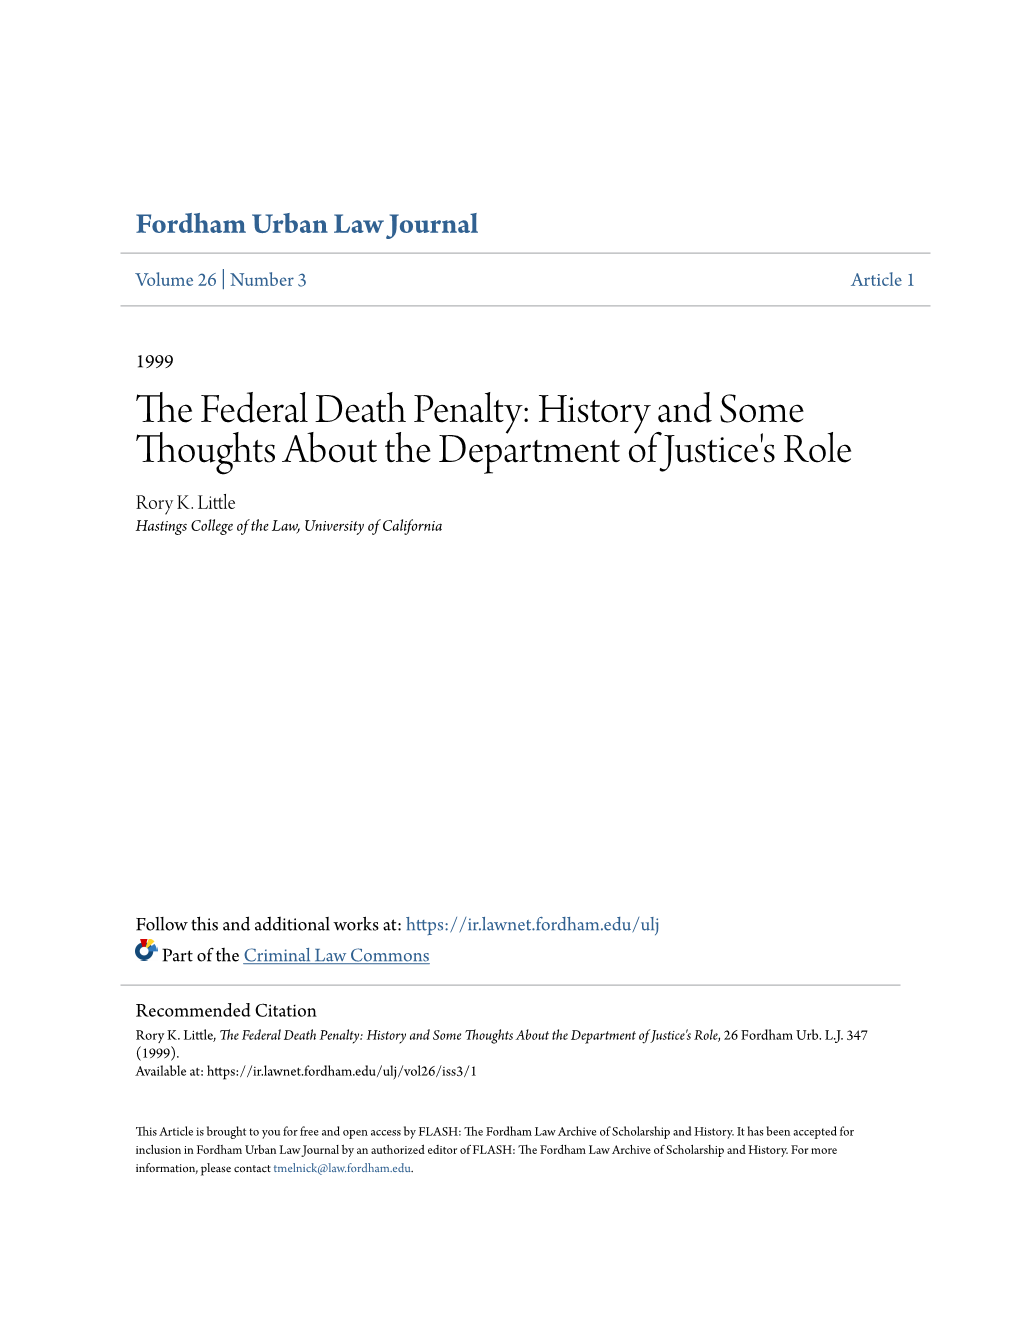 The Federal Death Penalty: History and Some Thoughts About the Department of Justice's Role, 26 Fordham Urb